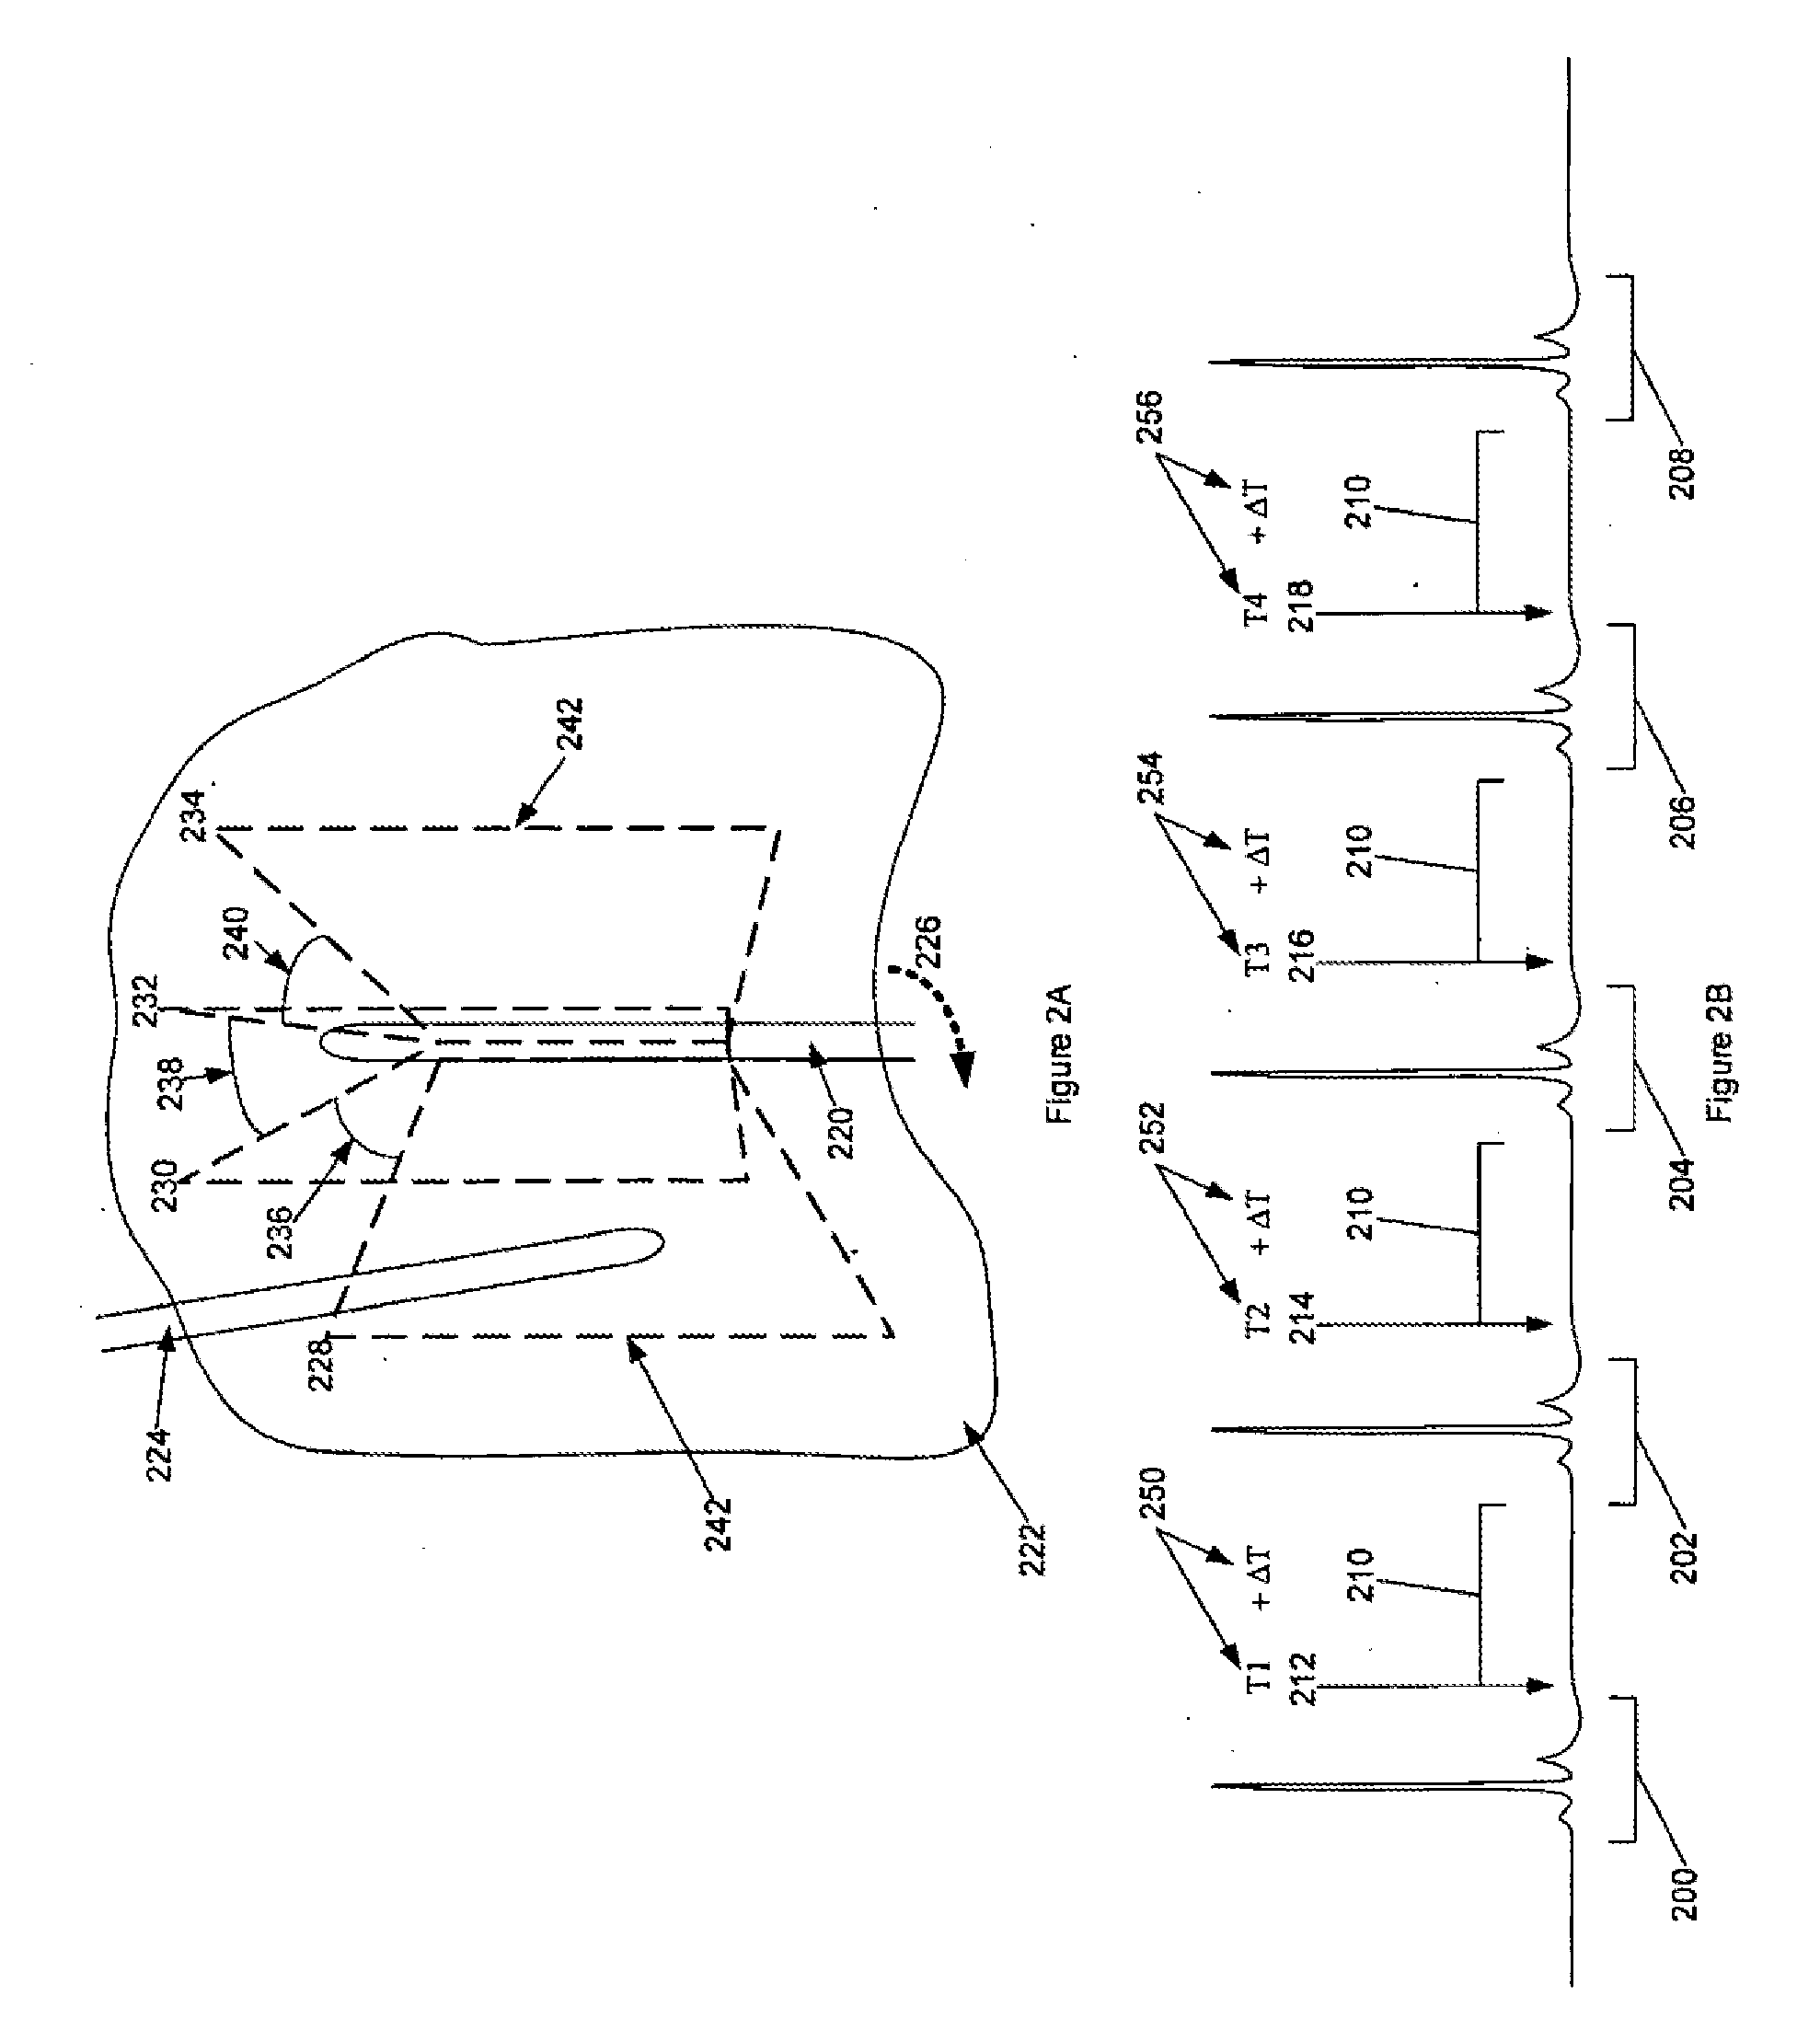 System and method for 3-d imaging